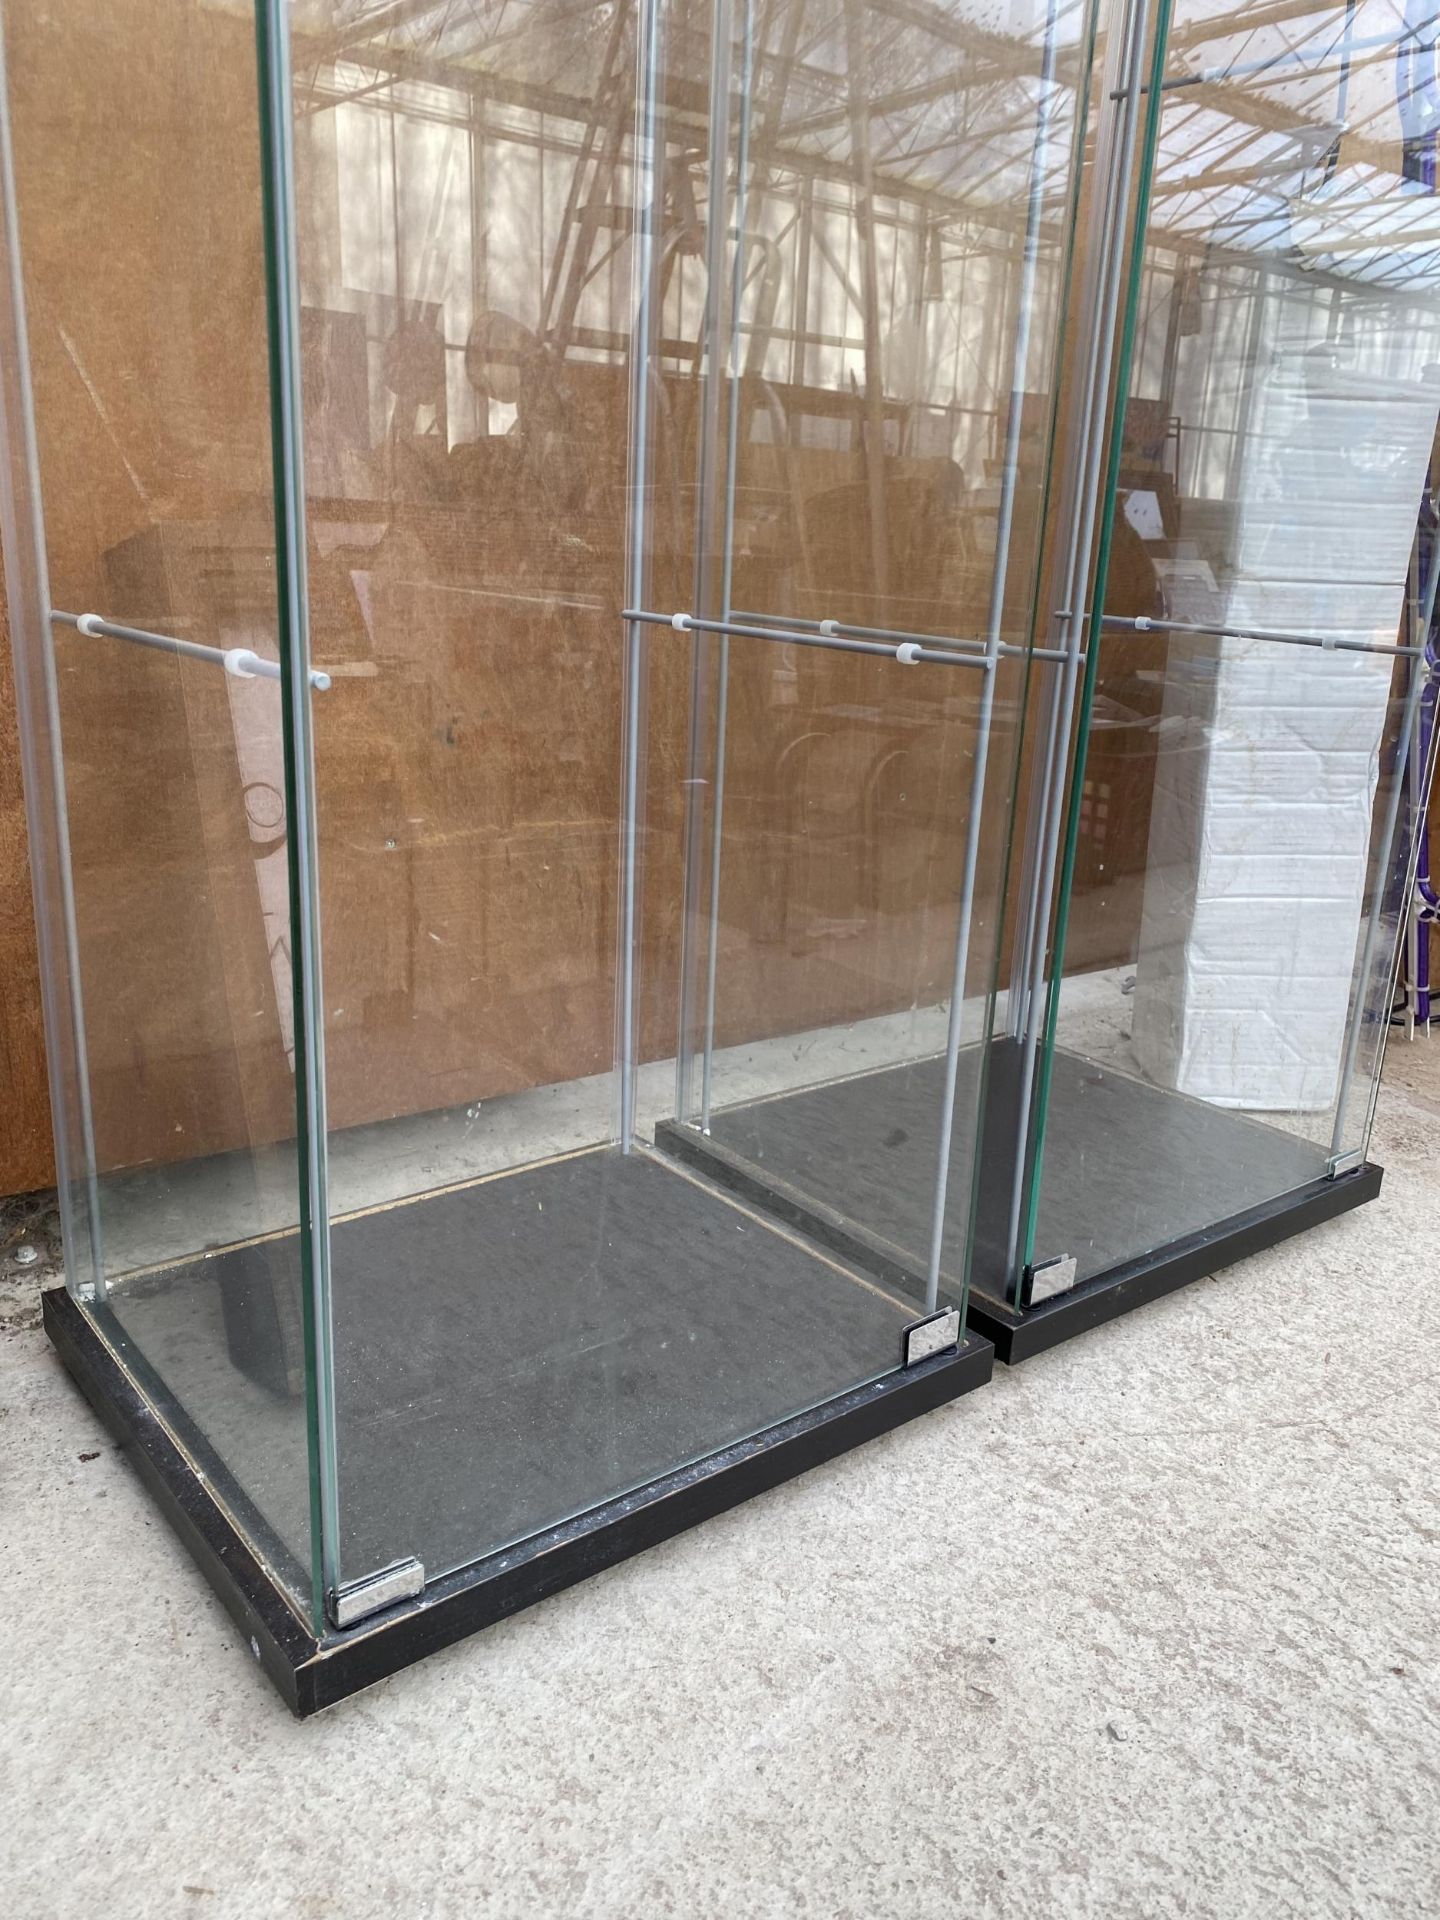 A PAIR OF GLASS DISPLAY CABINETS COMPLETE WITH THREE GLASS SHELVES EACH - Image 3 of 5